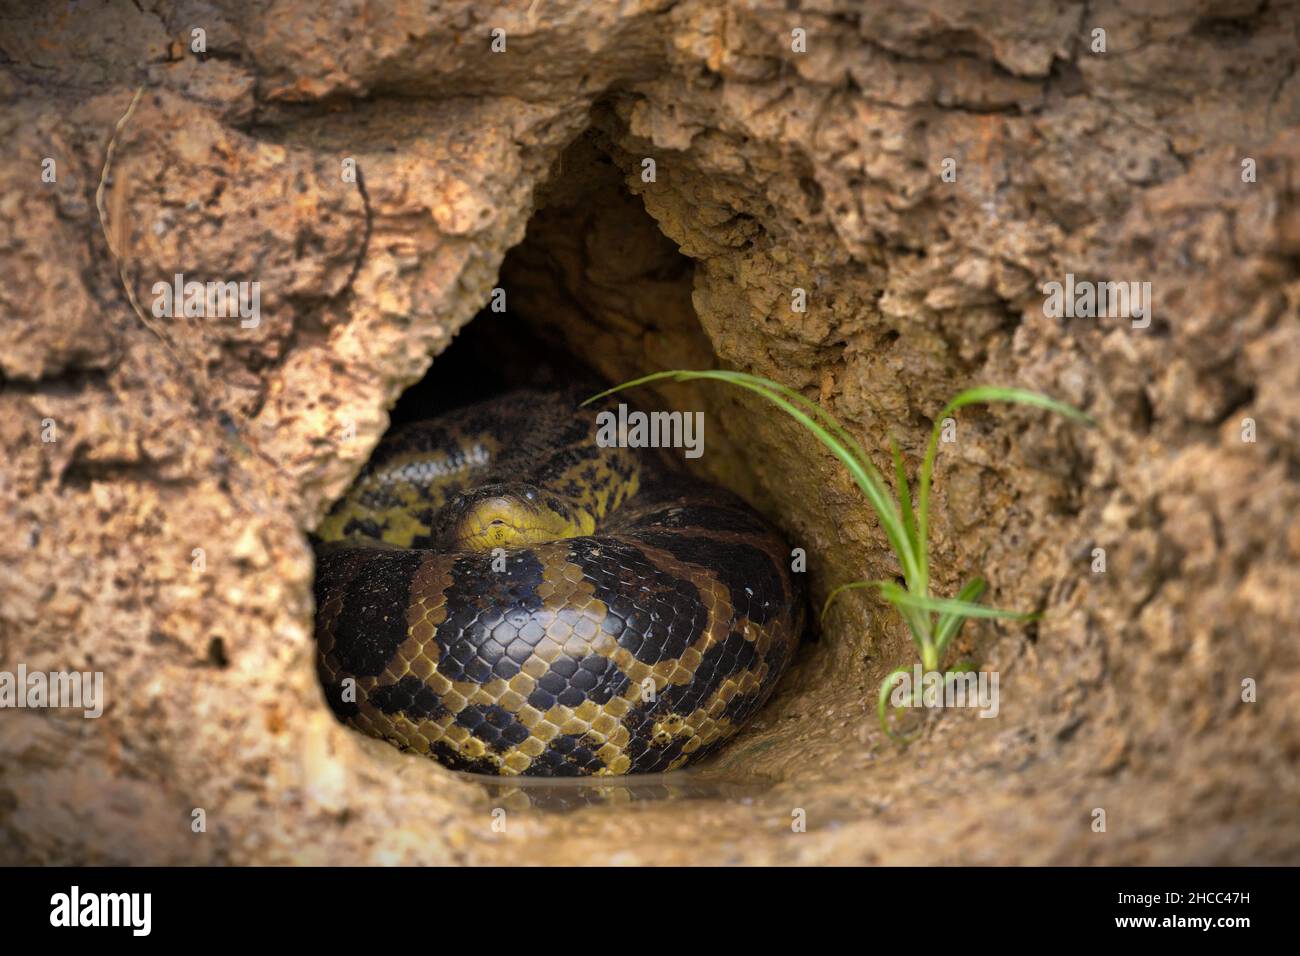 Snake wrapped around in a hole outdoors in Pantanal, Brazil during daylight Stock Photo